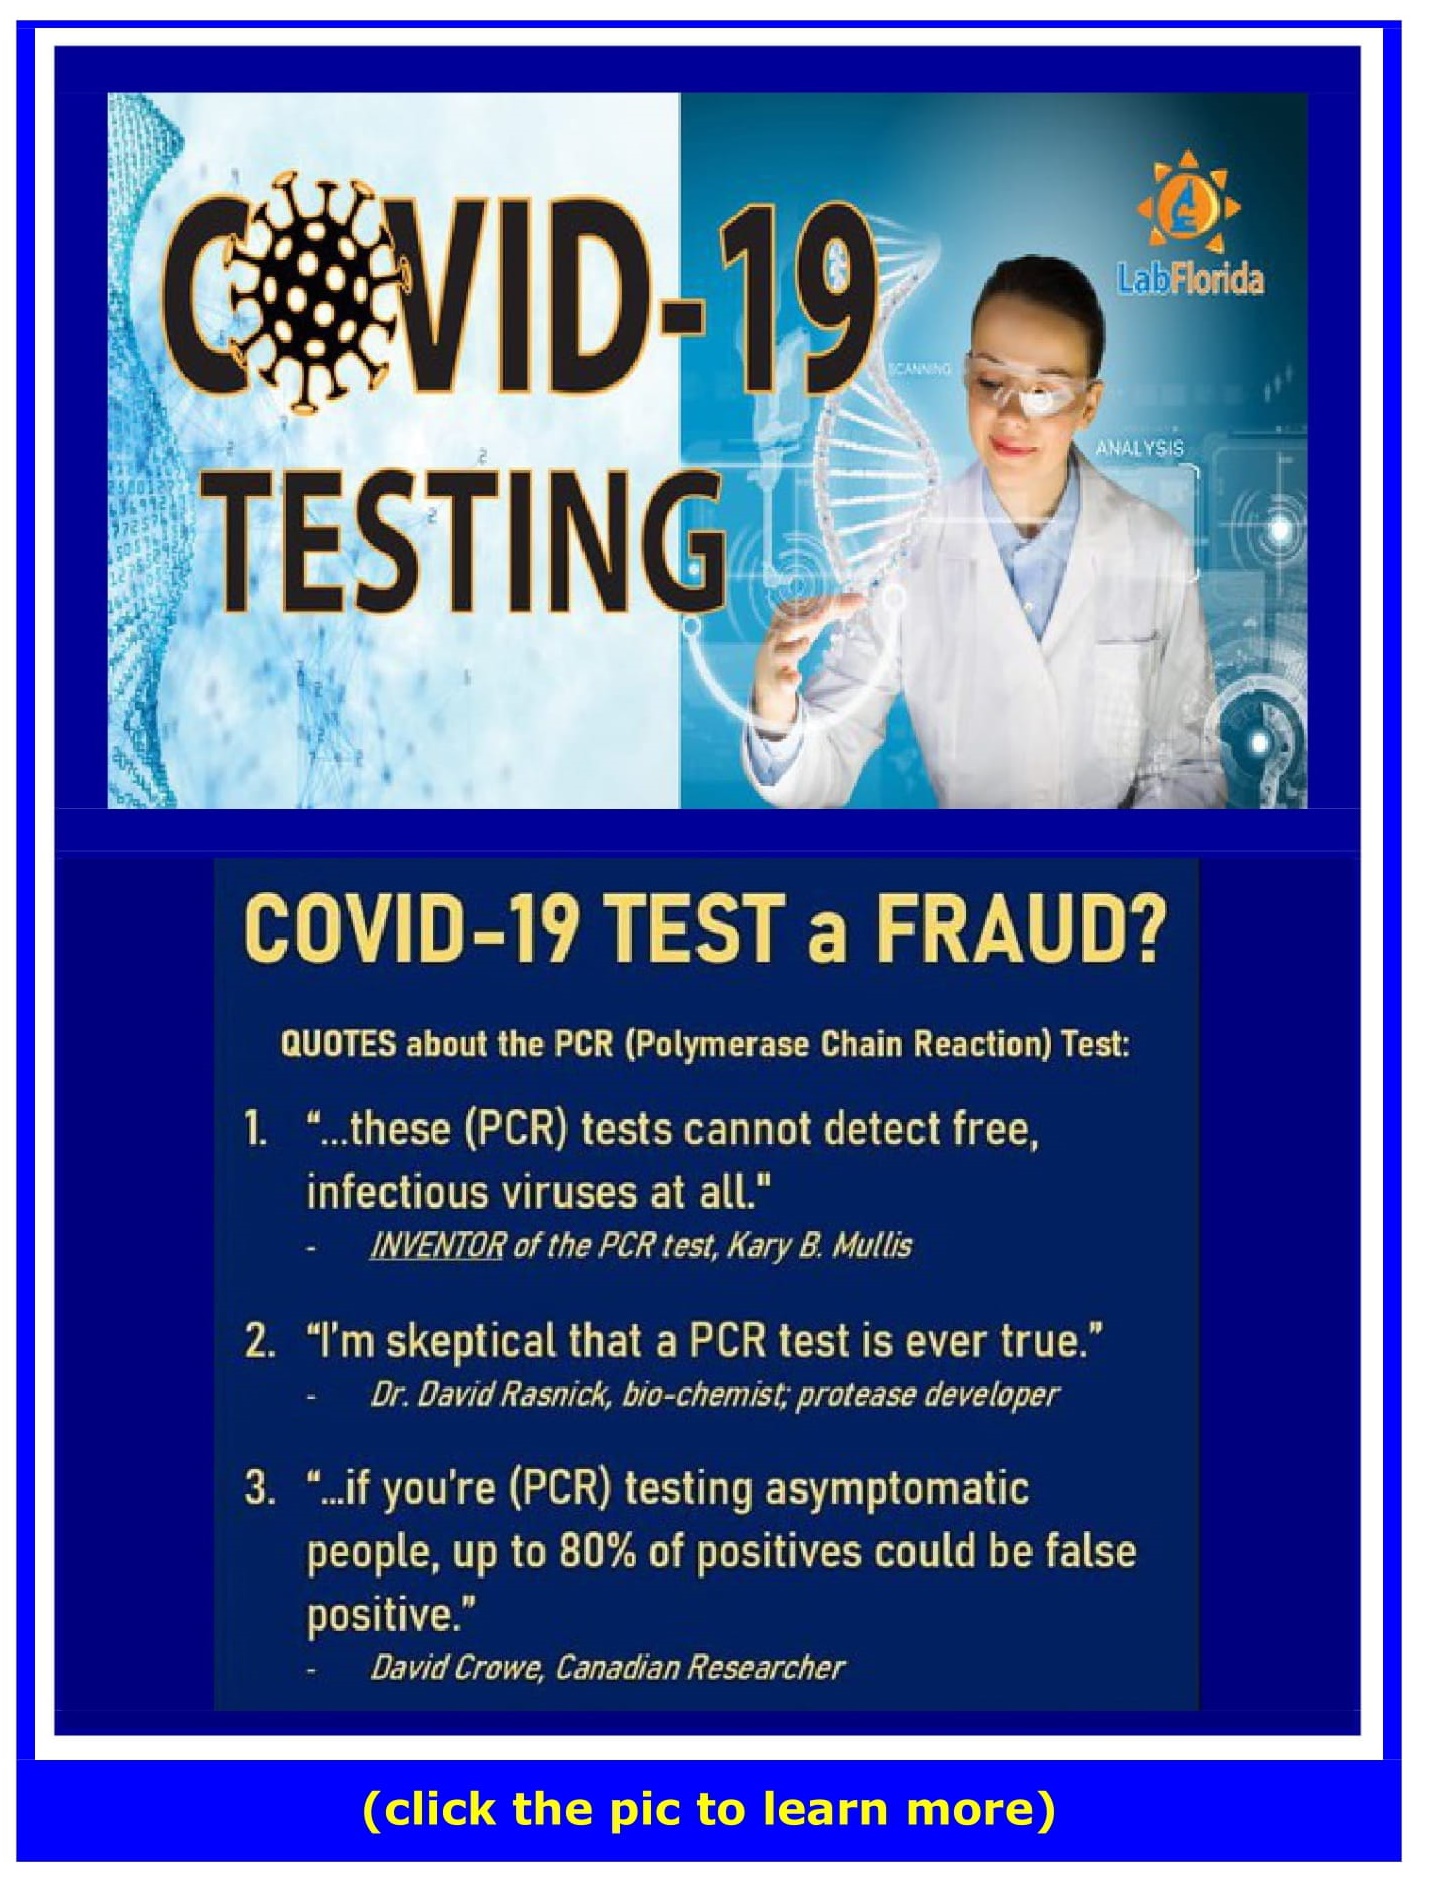 Covid Test is a Fraud